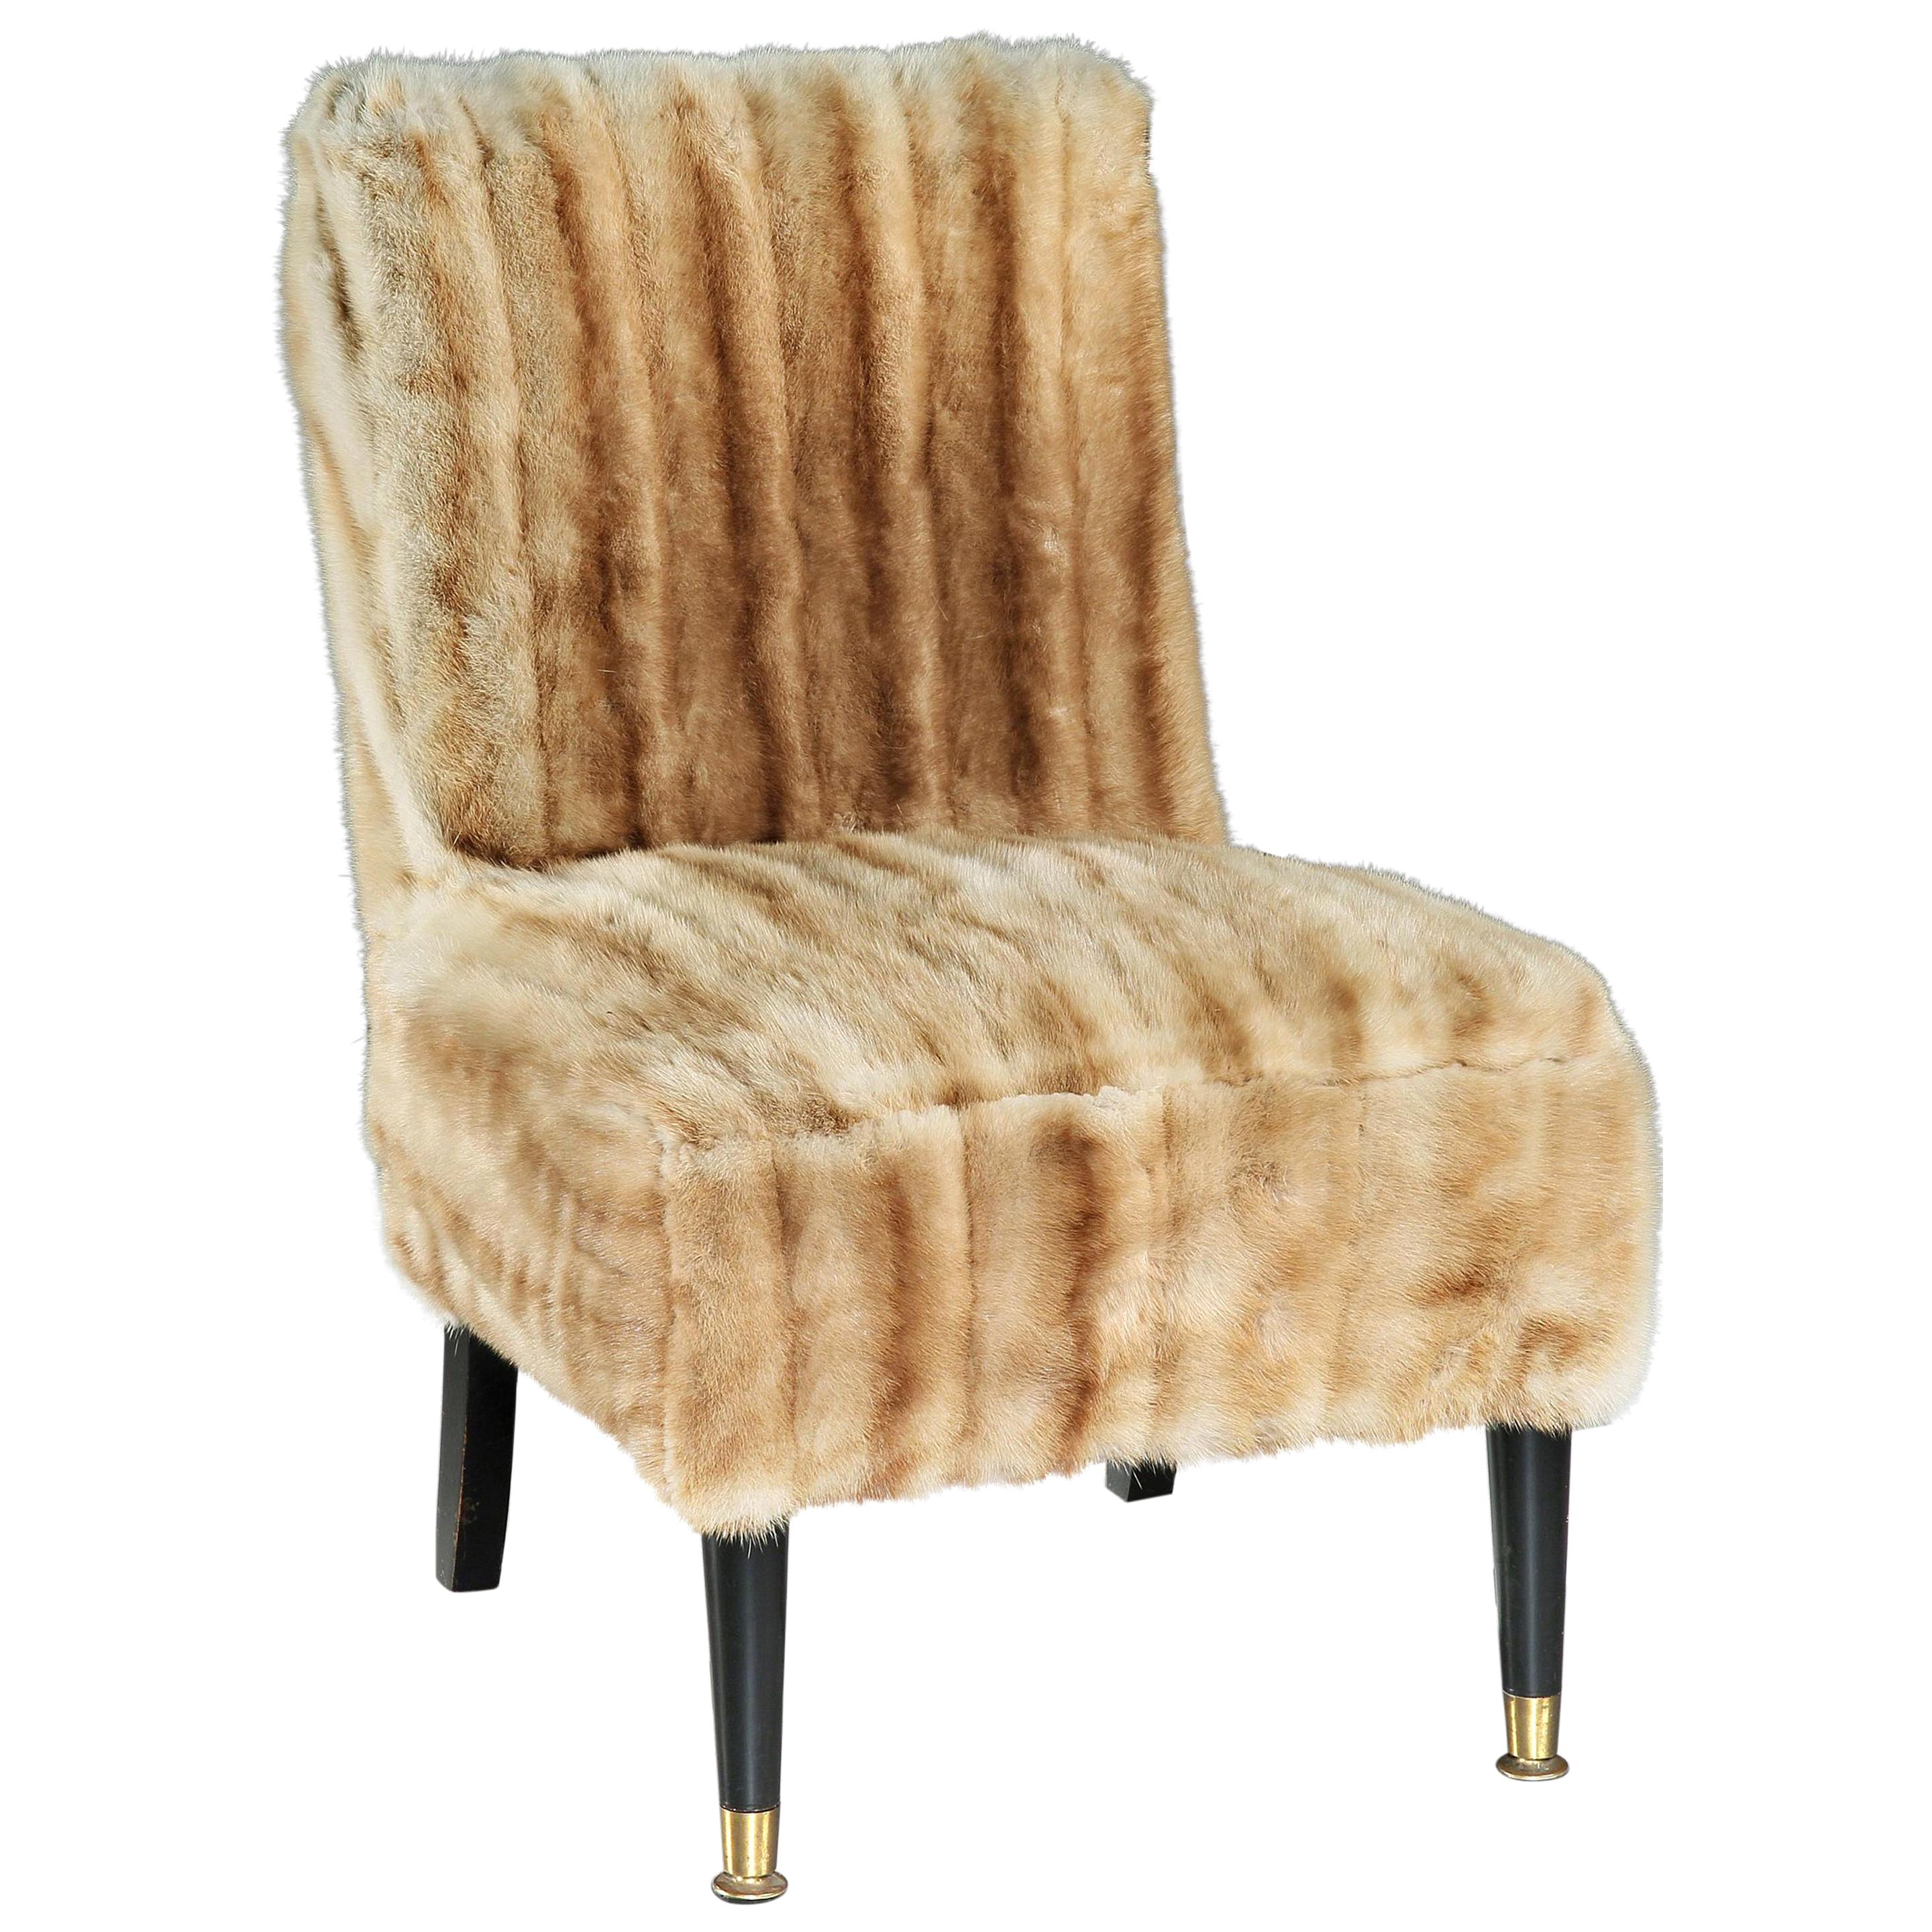 Chair, 20th Century, English, Modern, Upholstered, Mink